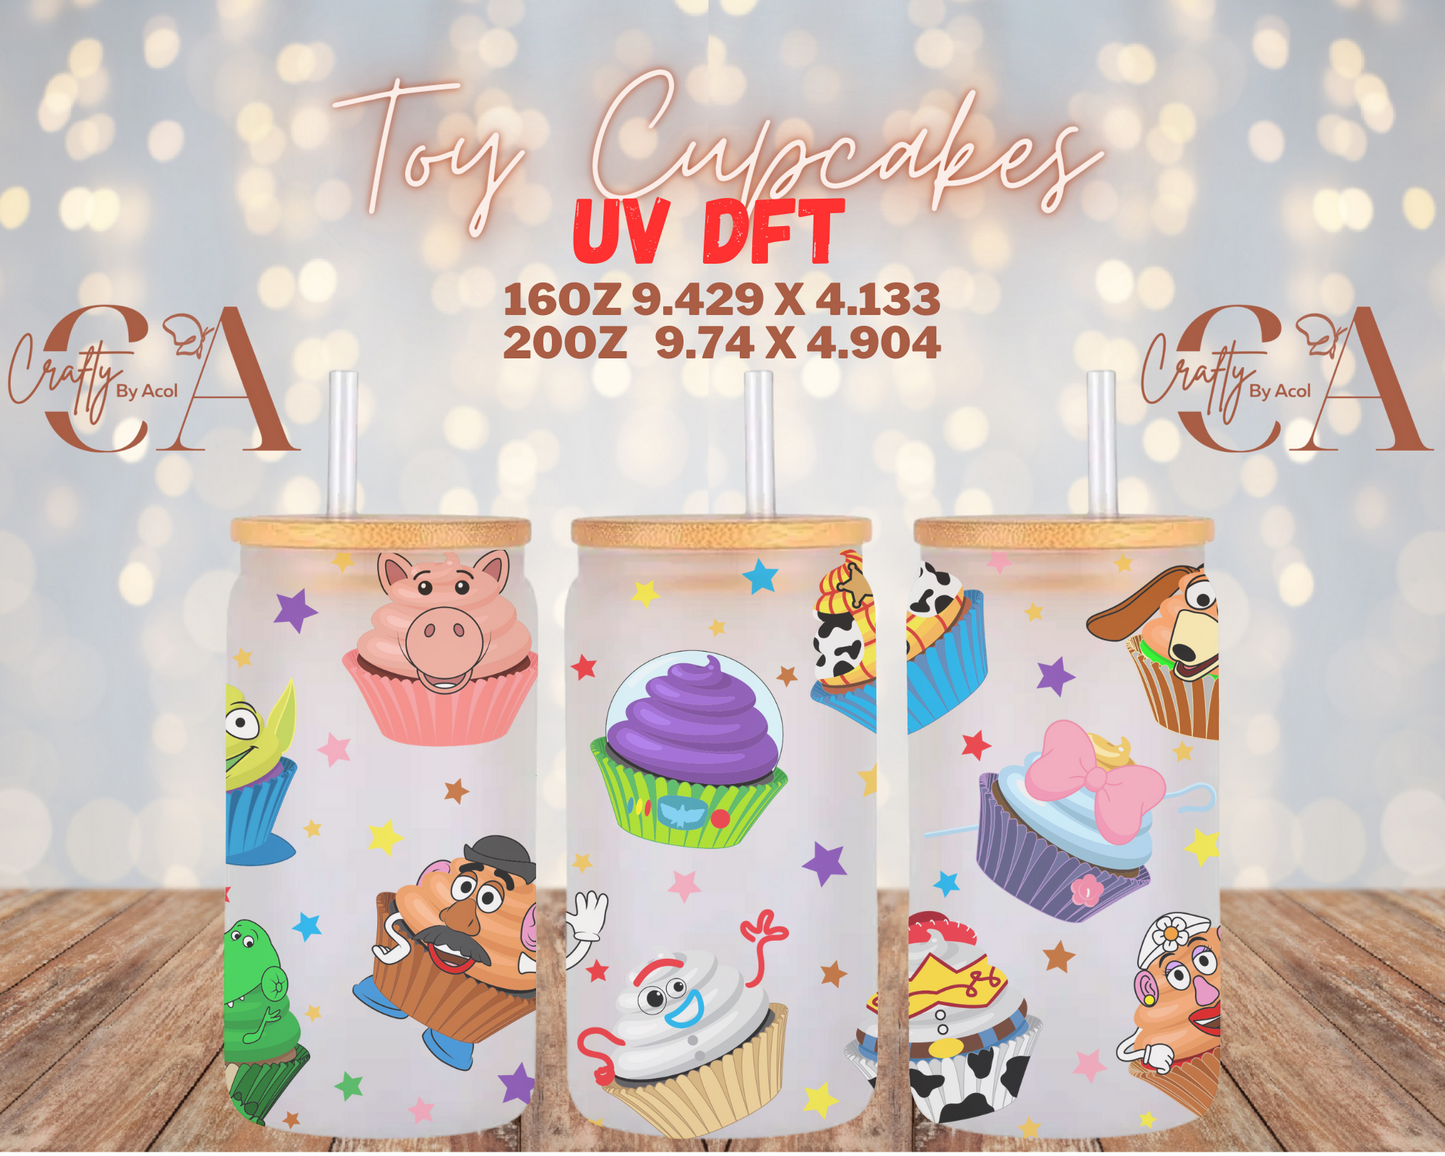 Toy Cupcakes UV DFT Cup Wrap